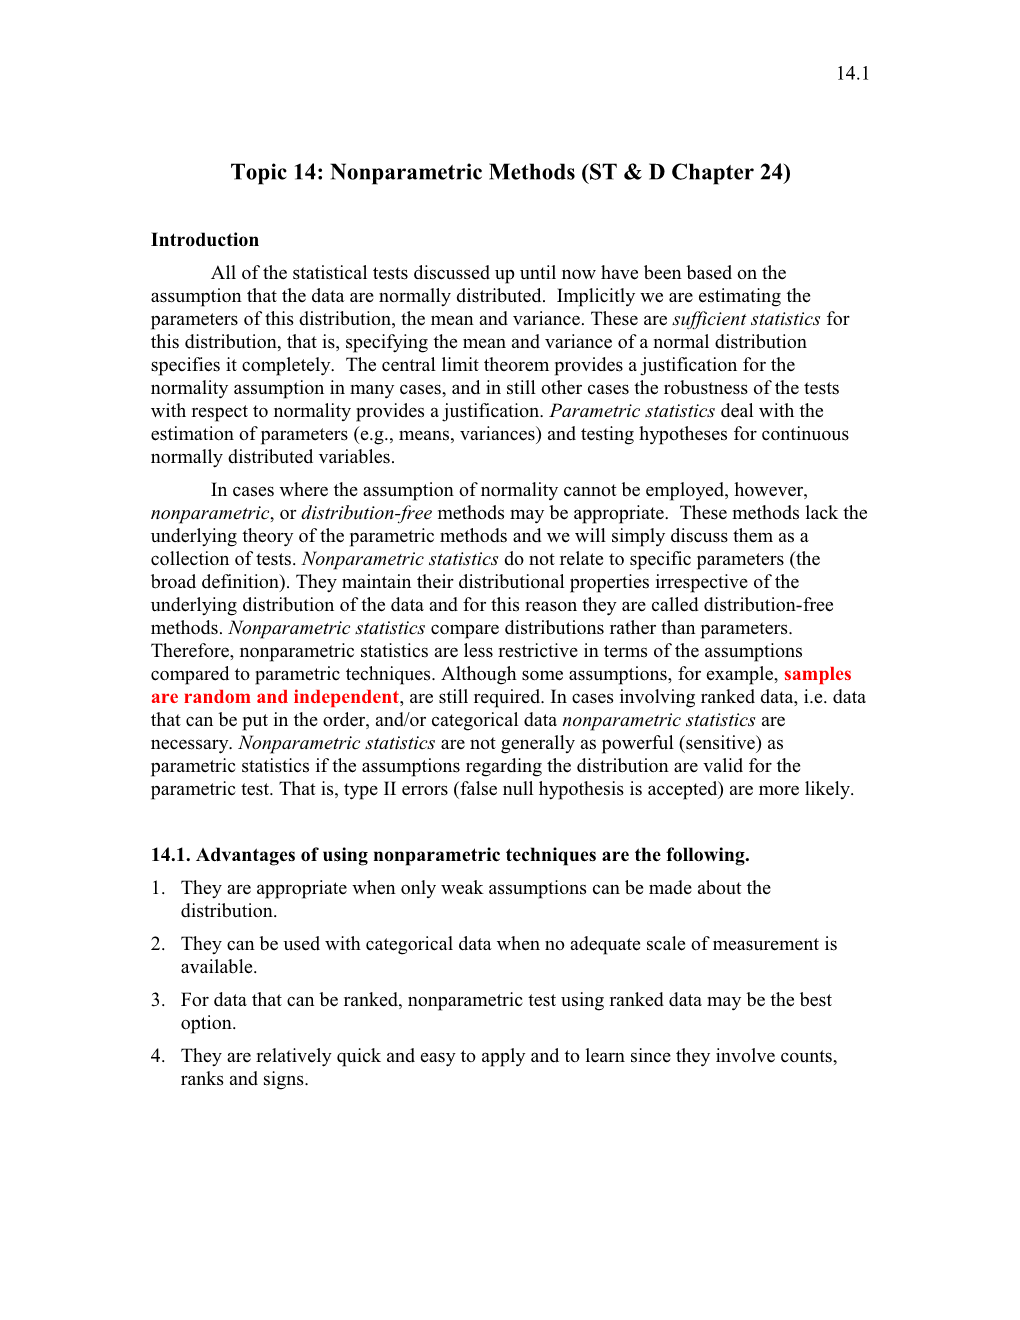 Topic 14: Nonparametric Methods (ST & D Chapter 24)